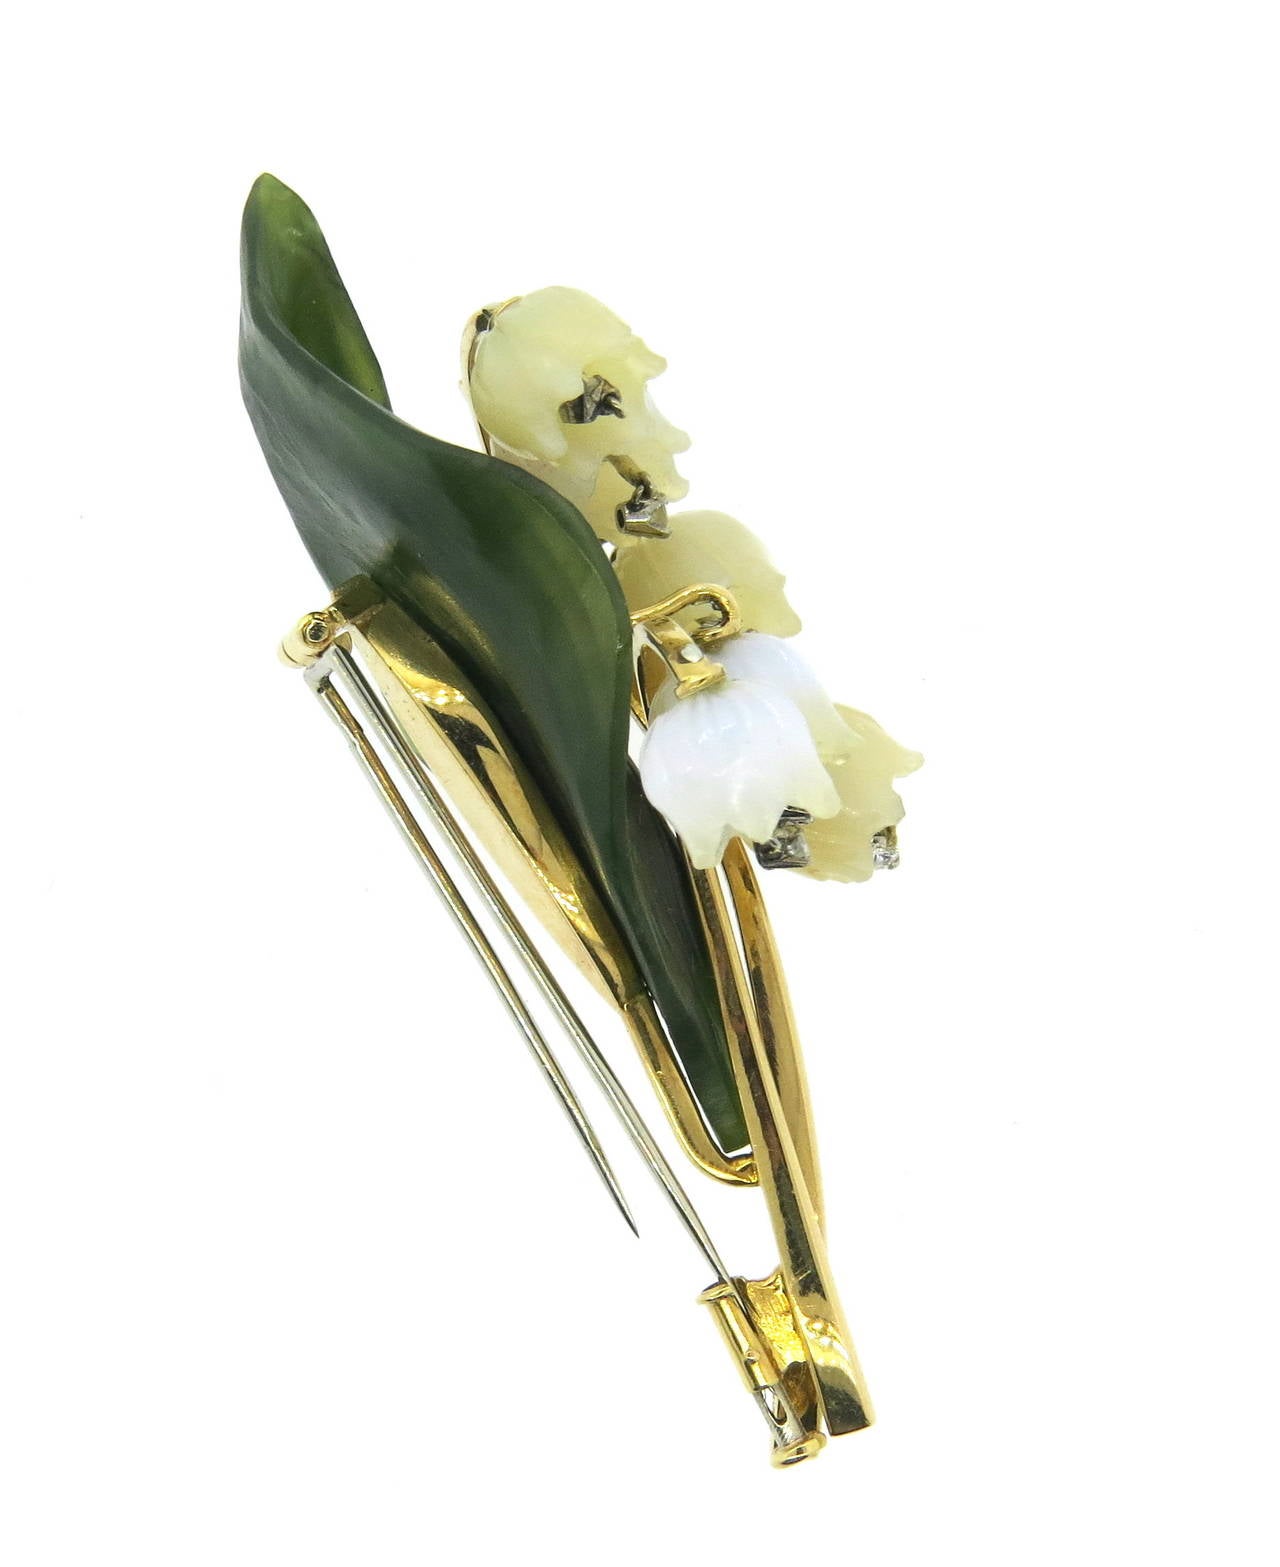 Beautiful and delicate brooch, set in 18k gold, featuring carved nephrite leaf and mother of pearl lily of the valley flowers,each decorated with dangling diamond. Brooch measures 65mm x 30mm. Weight of the piece - 19.2 grams